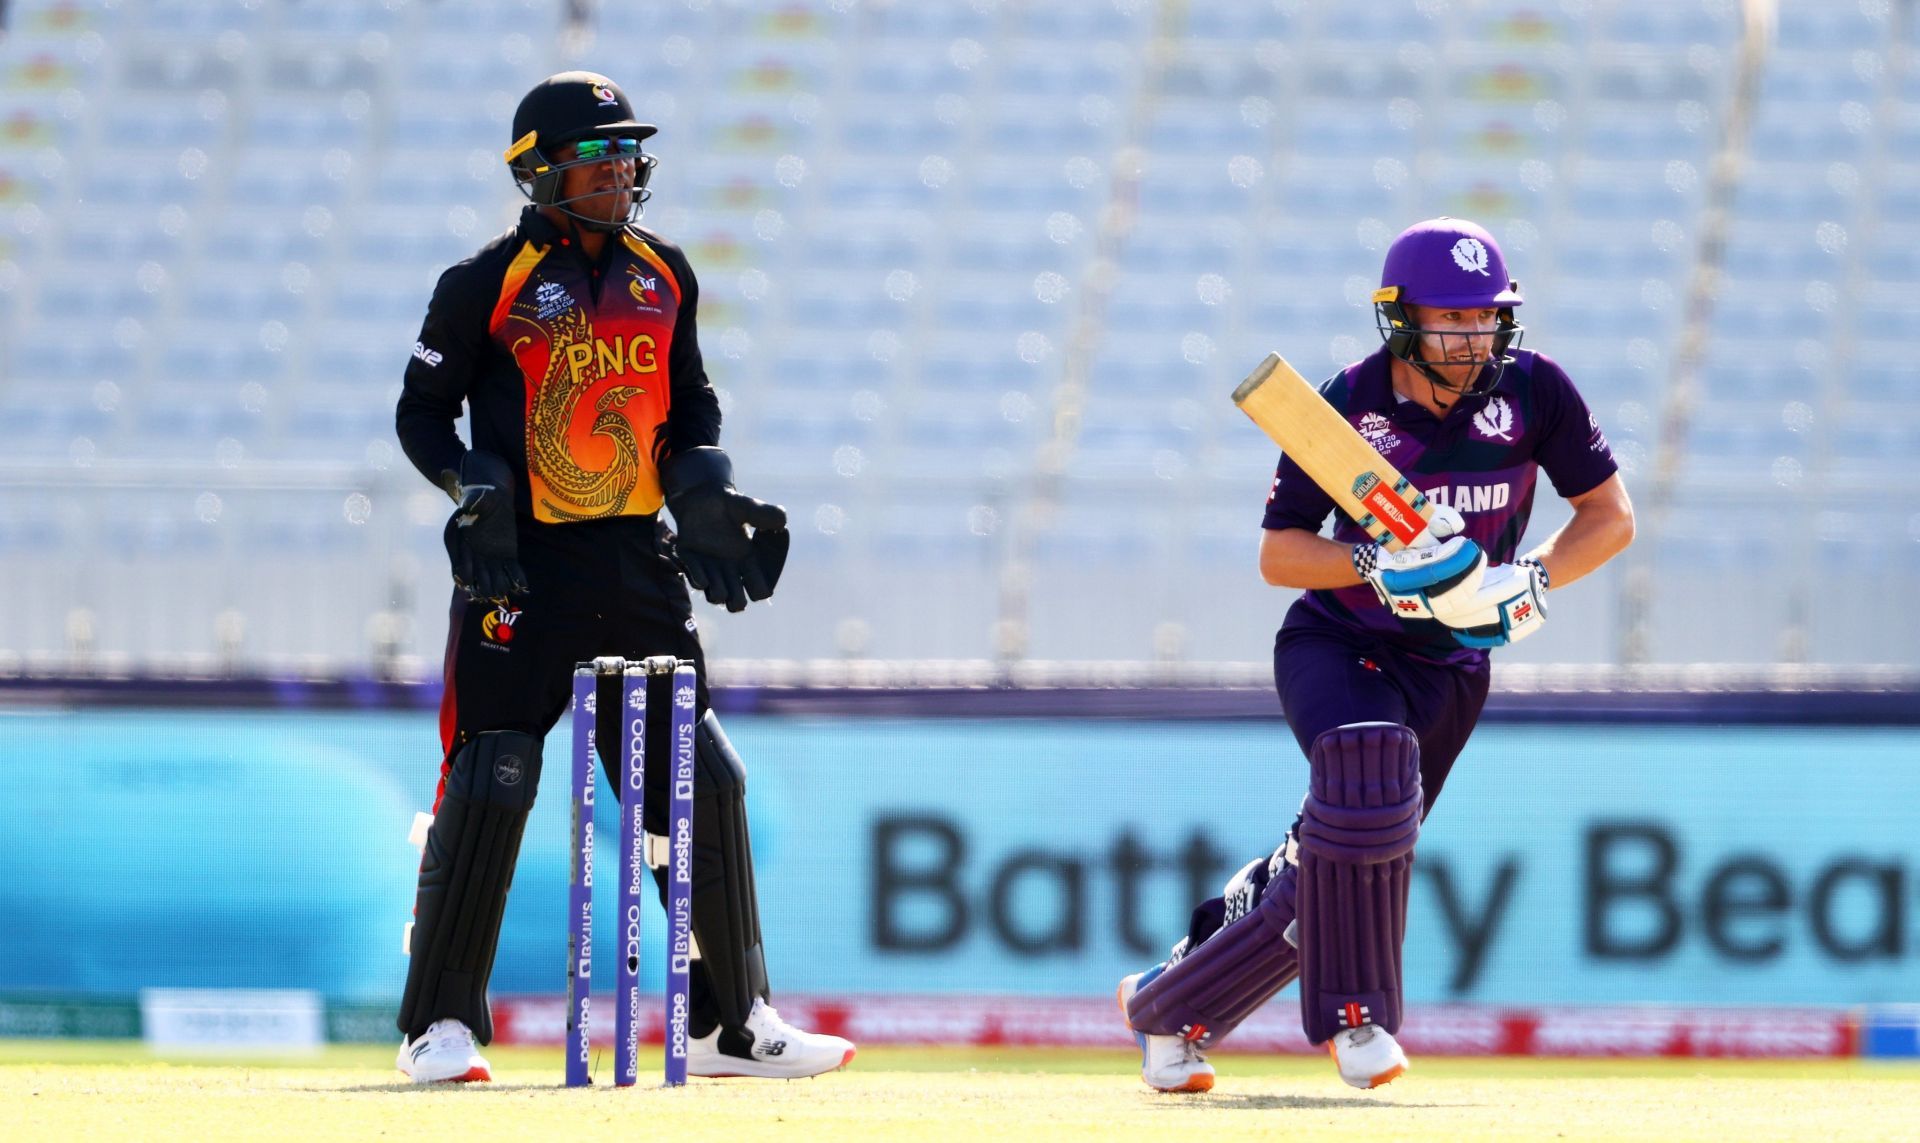 Papua New Guinea put up a brave fight in their 17-run defeat to Scotland [Credits: T20 World Cup]